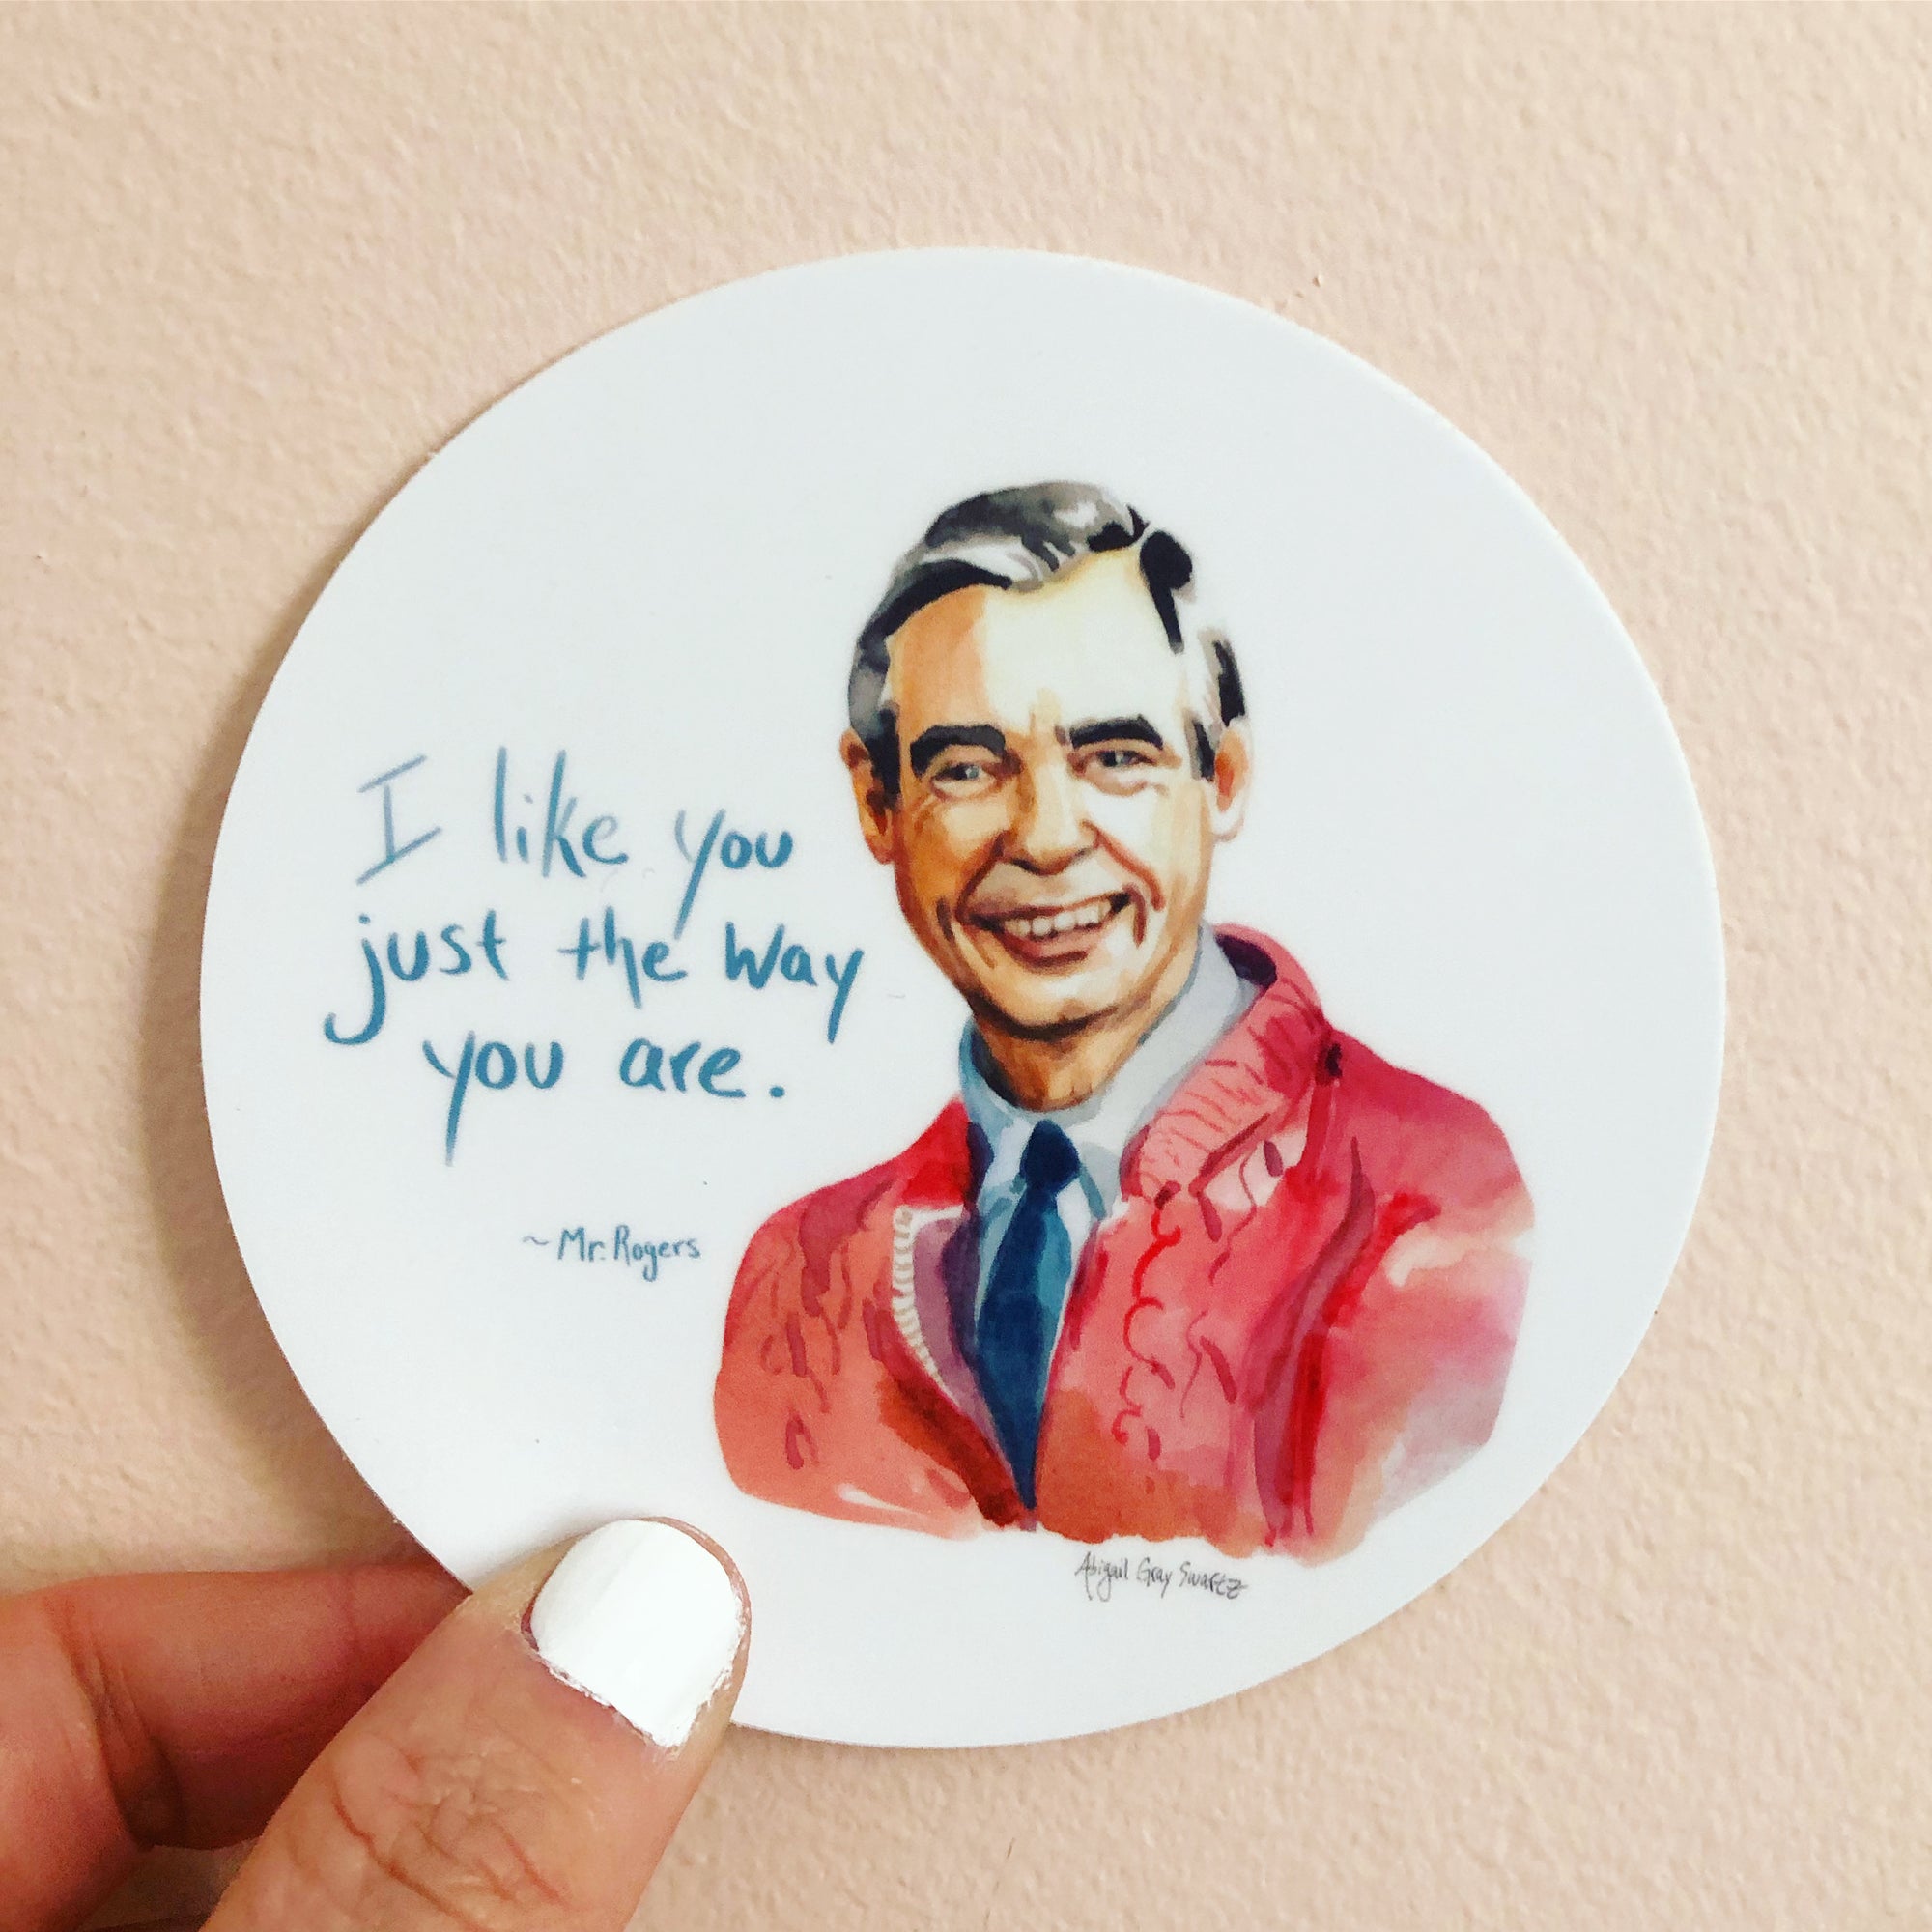 Mr Rogers portrait sticker and quote "I Like you just the way you are" by Abigail Gray Swartz